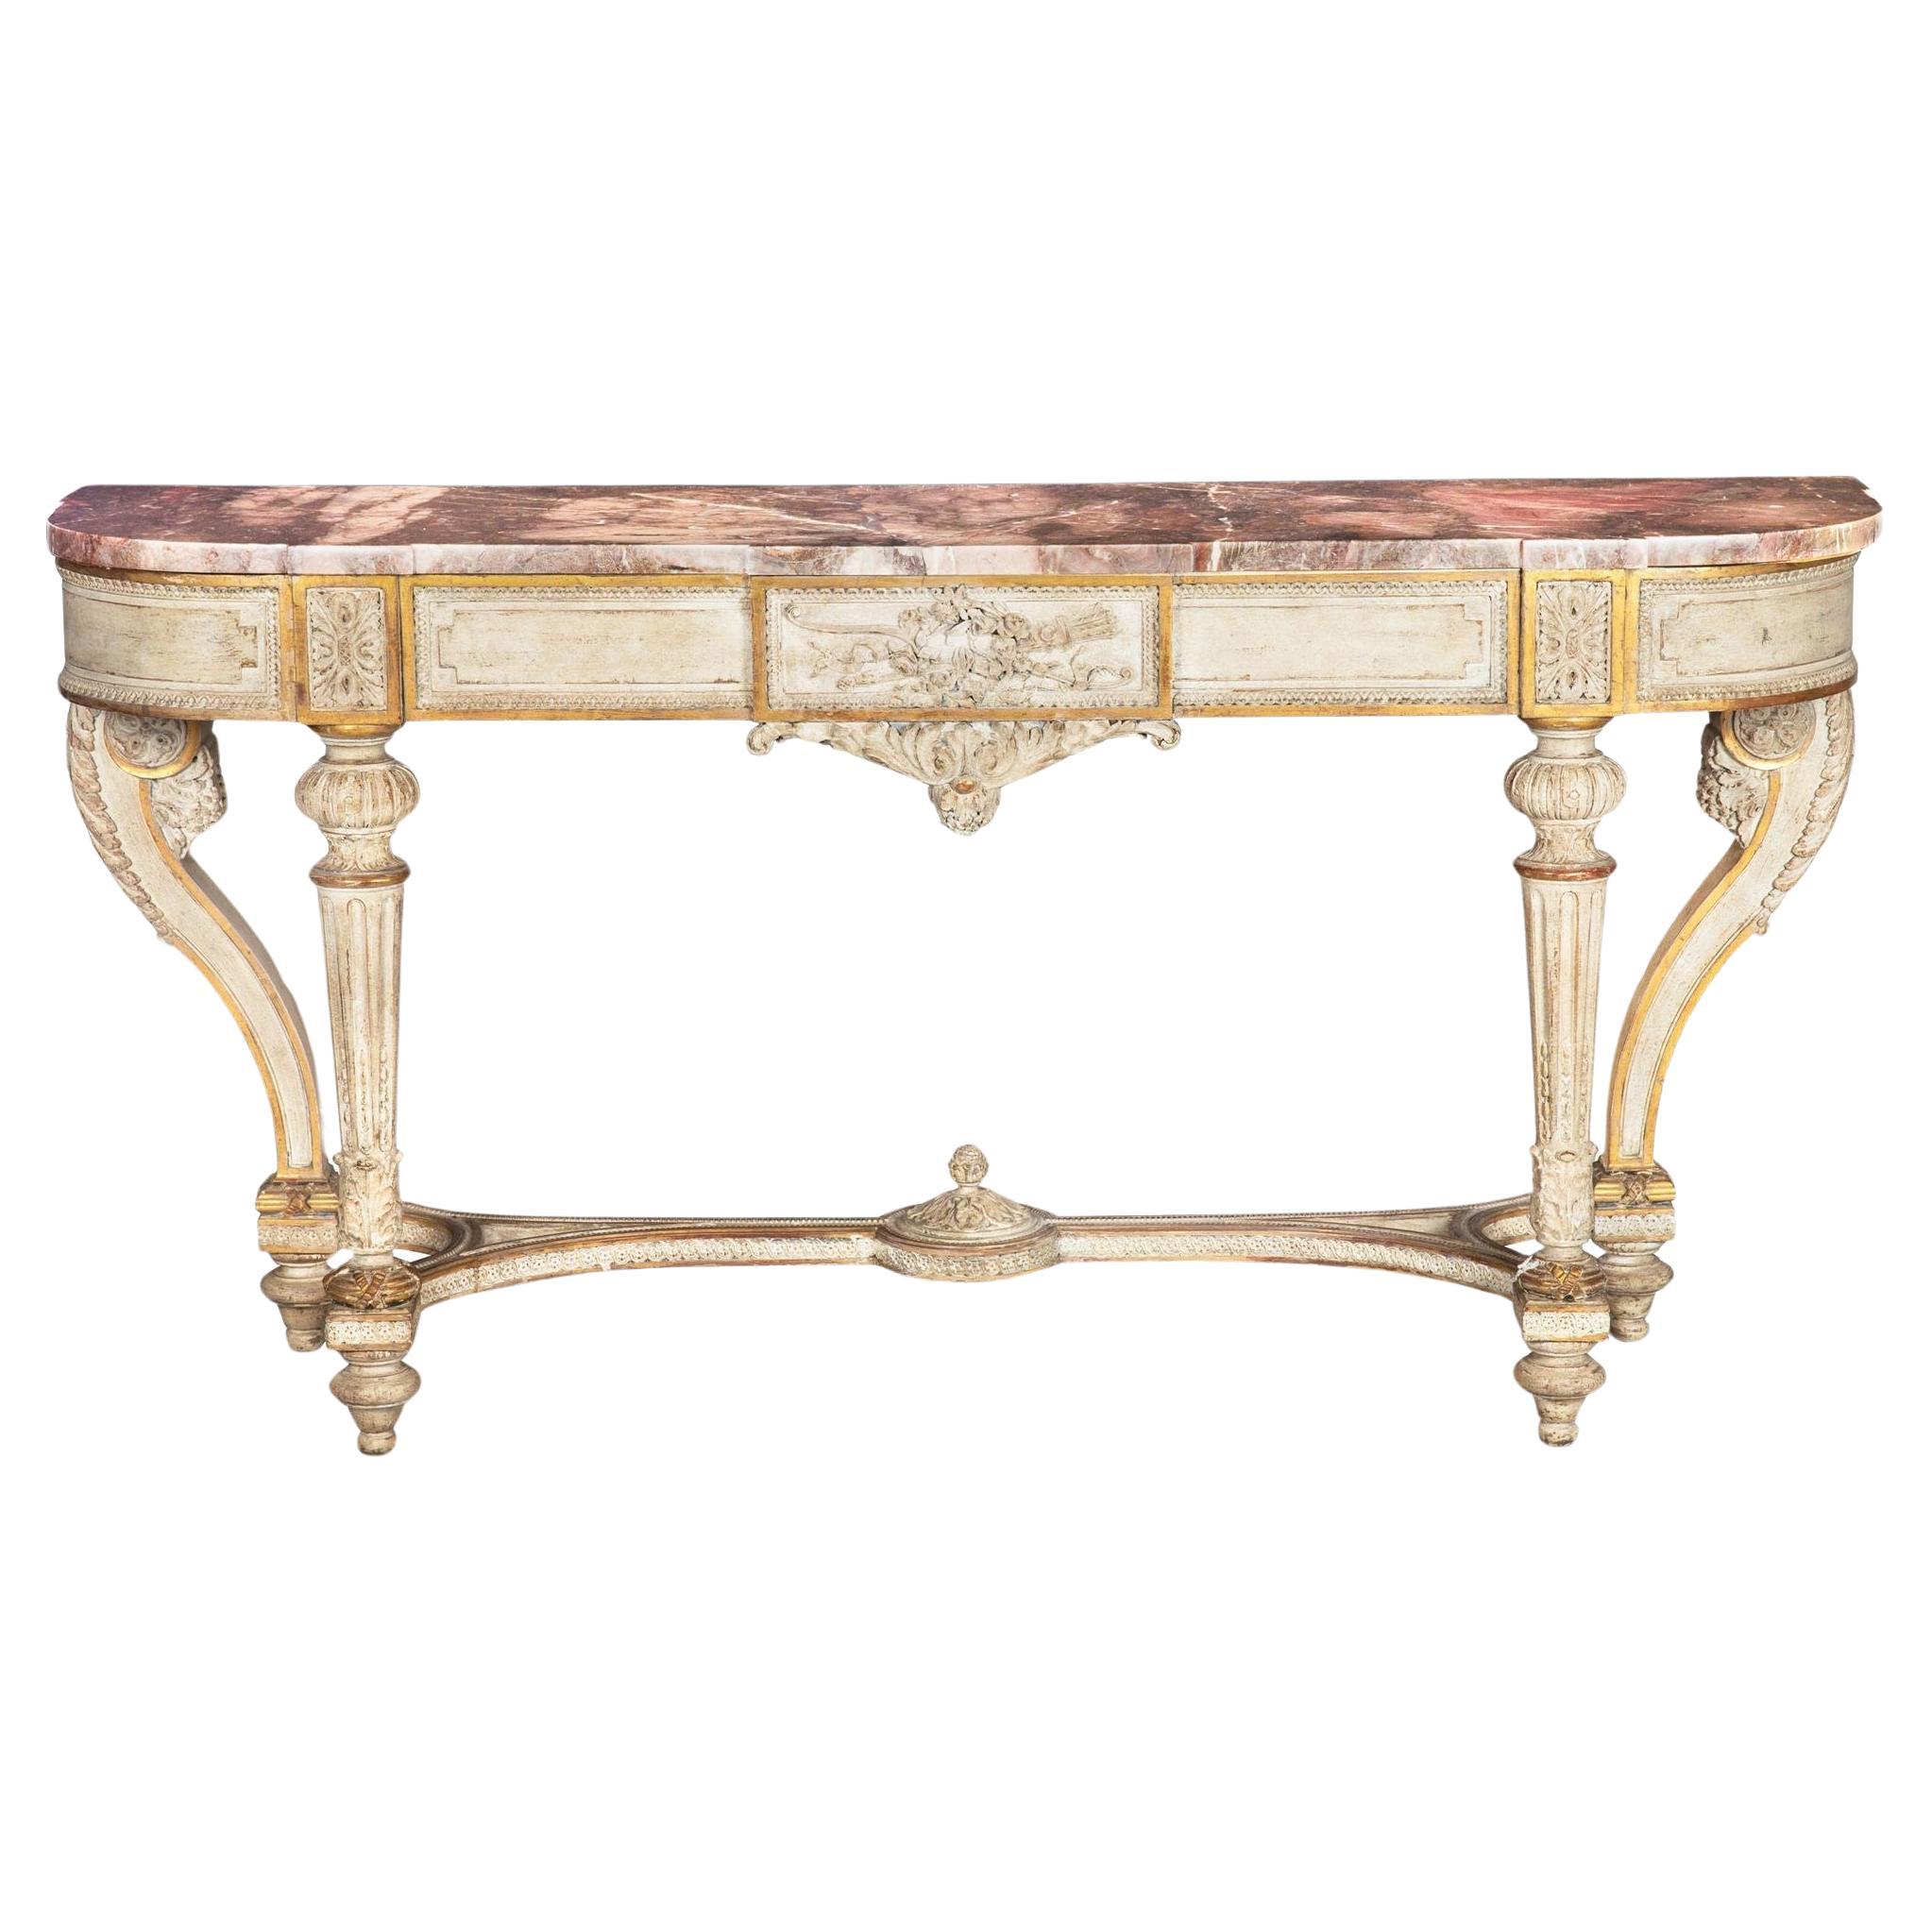 French Louis XVI Style White Painted and Parcel-Gilt Violet Marble Console Table